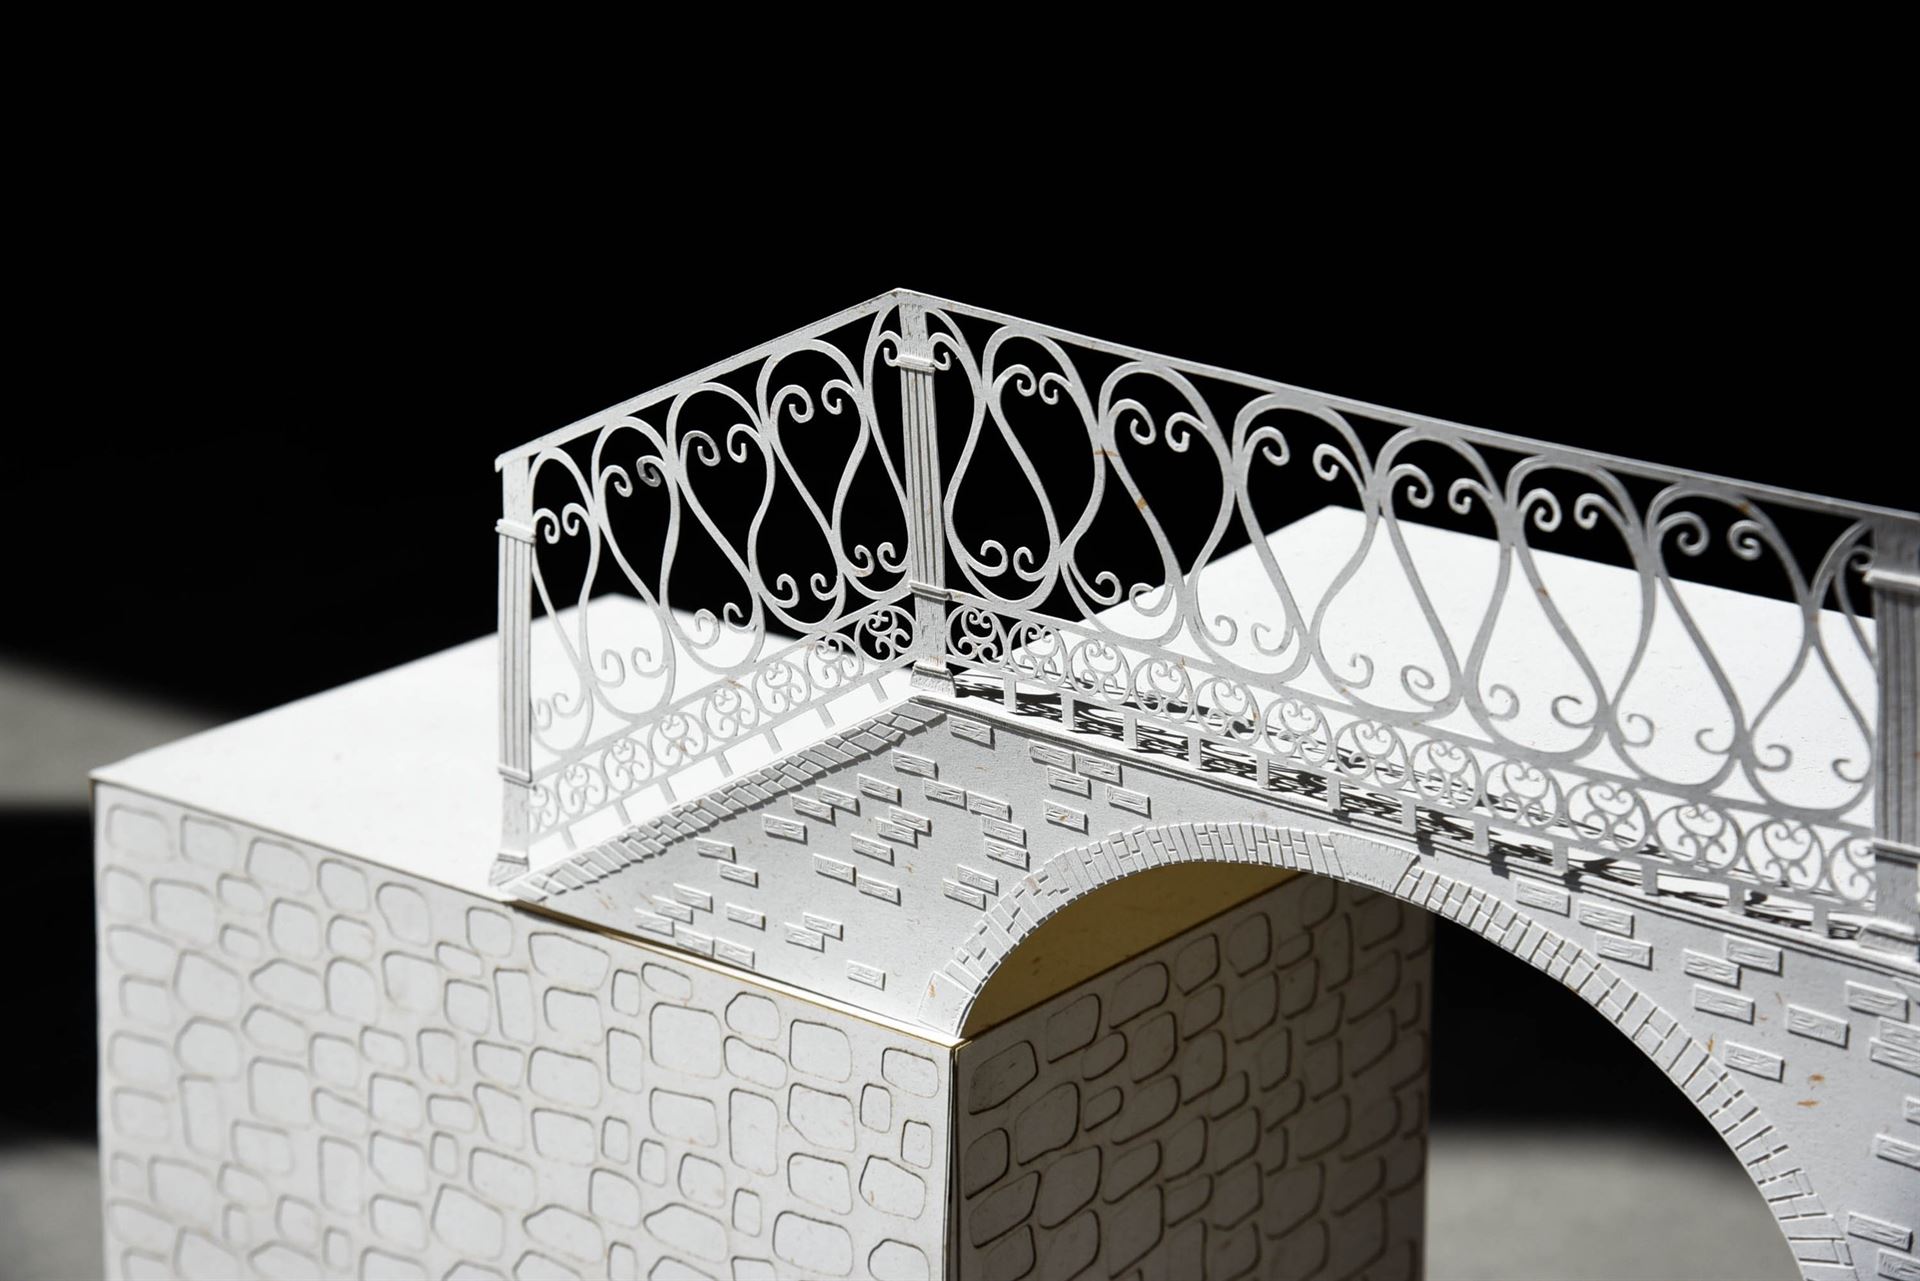 A detail of an architectural sculpture made of paper.